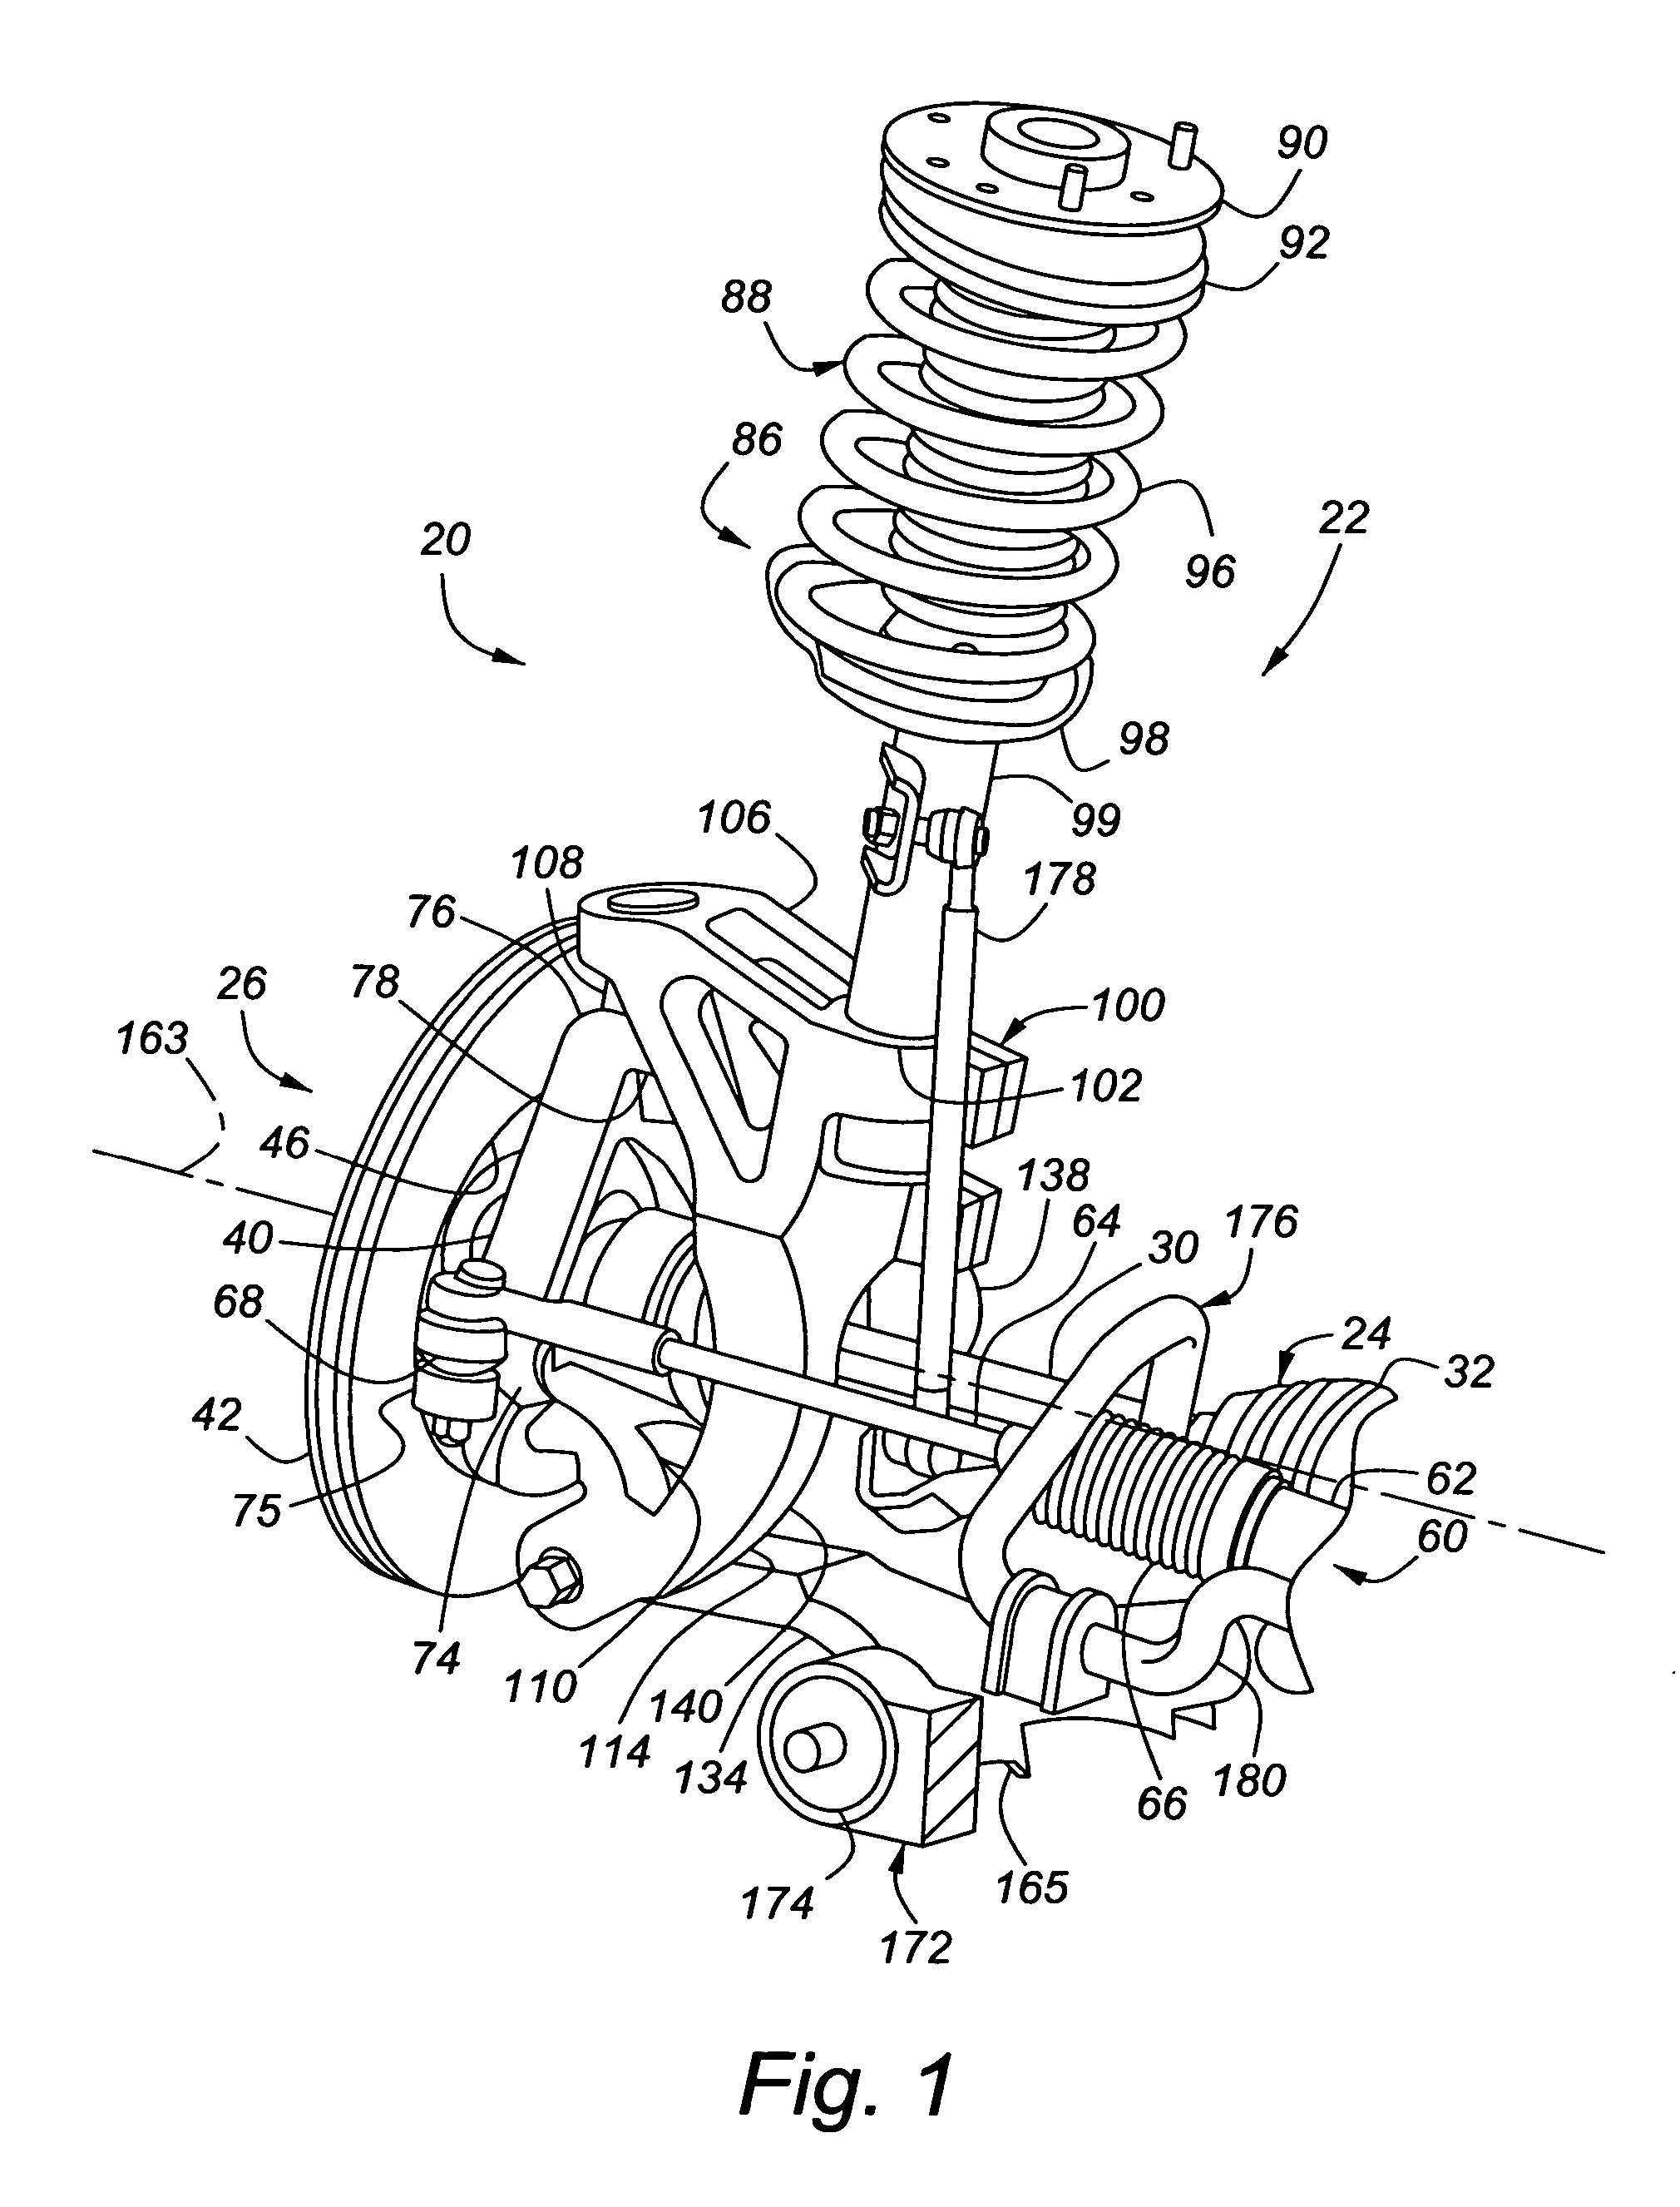 Steering and suspension system for a vehicle